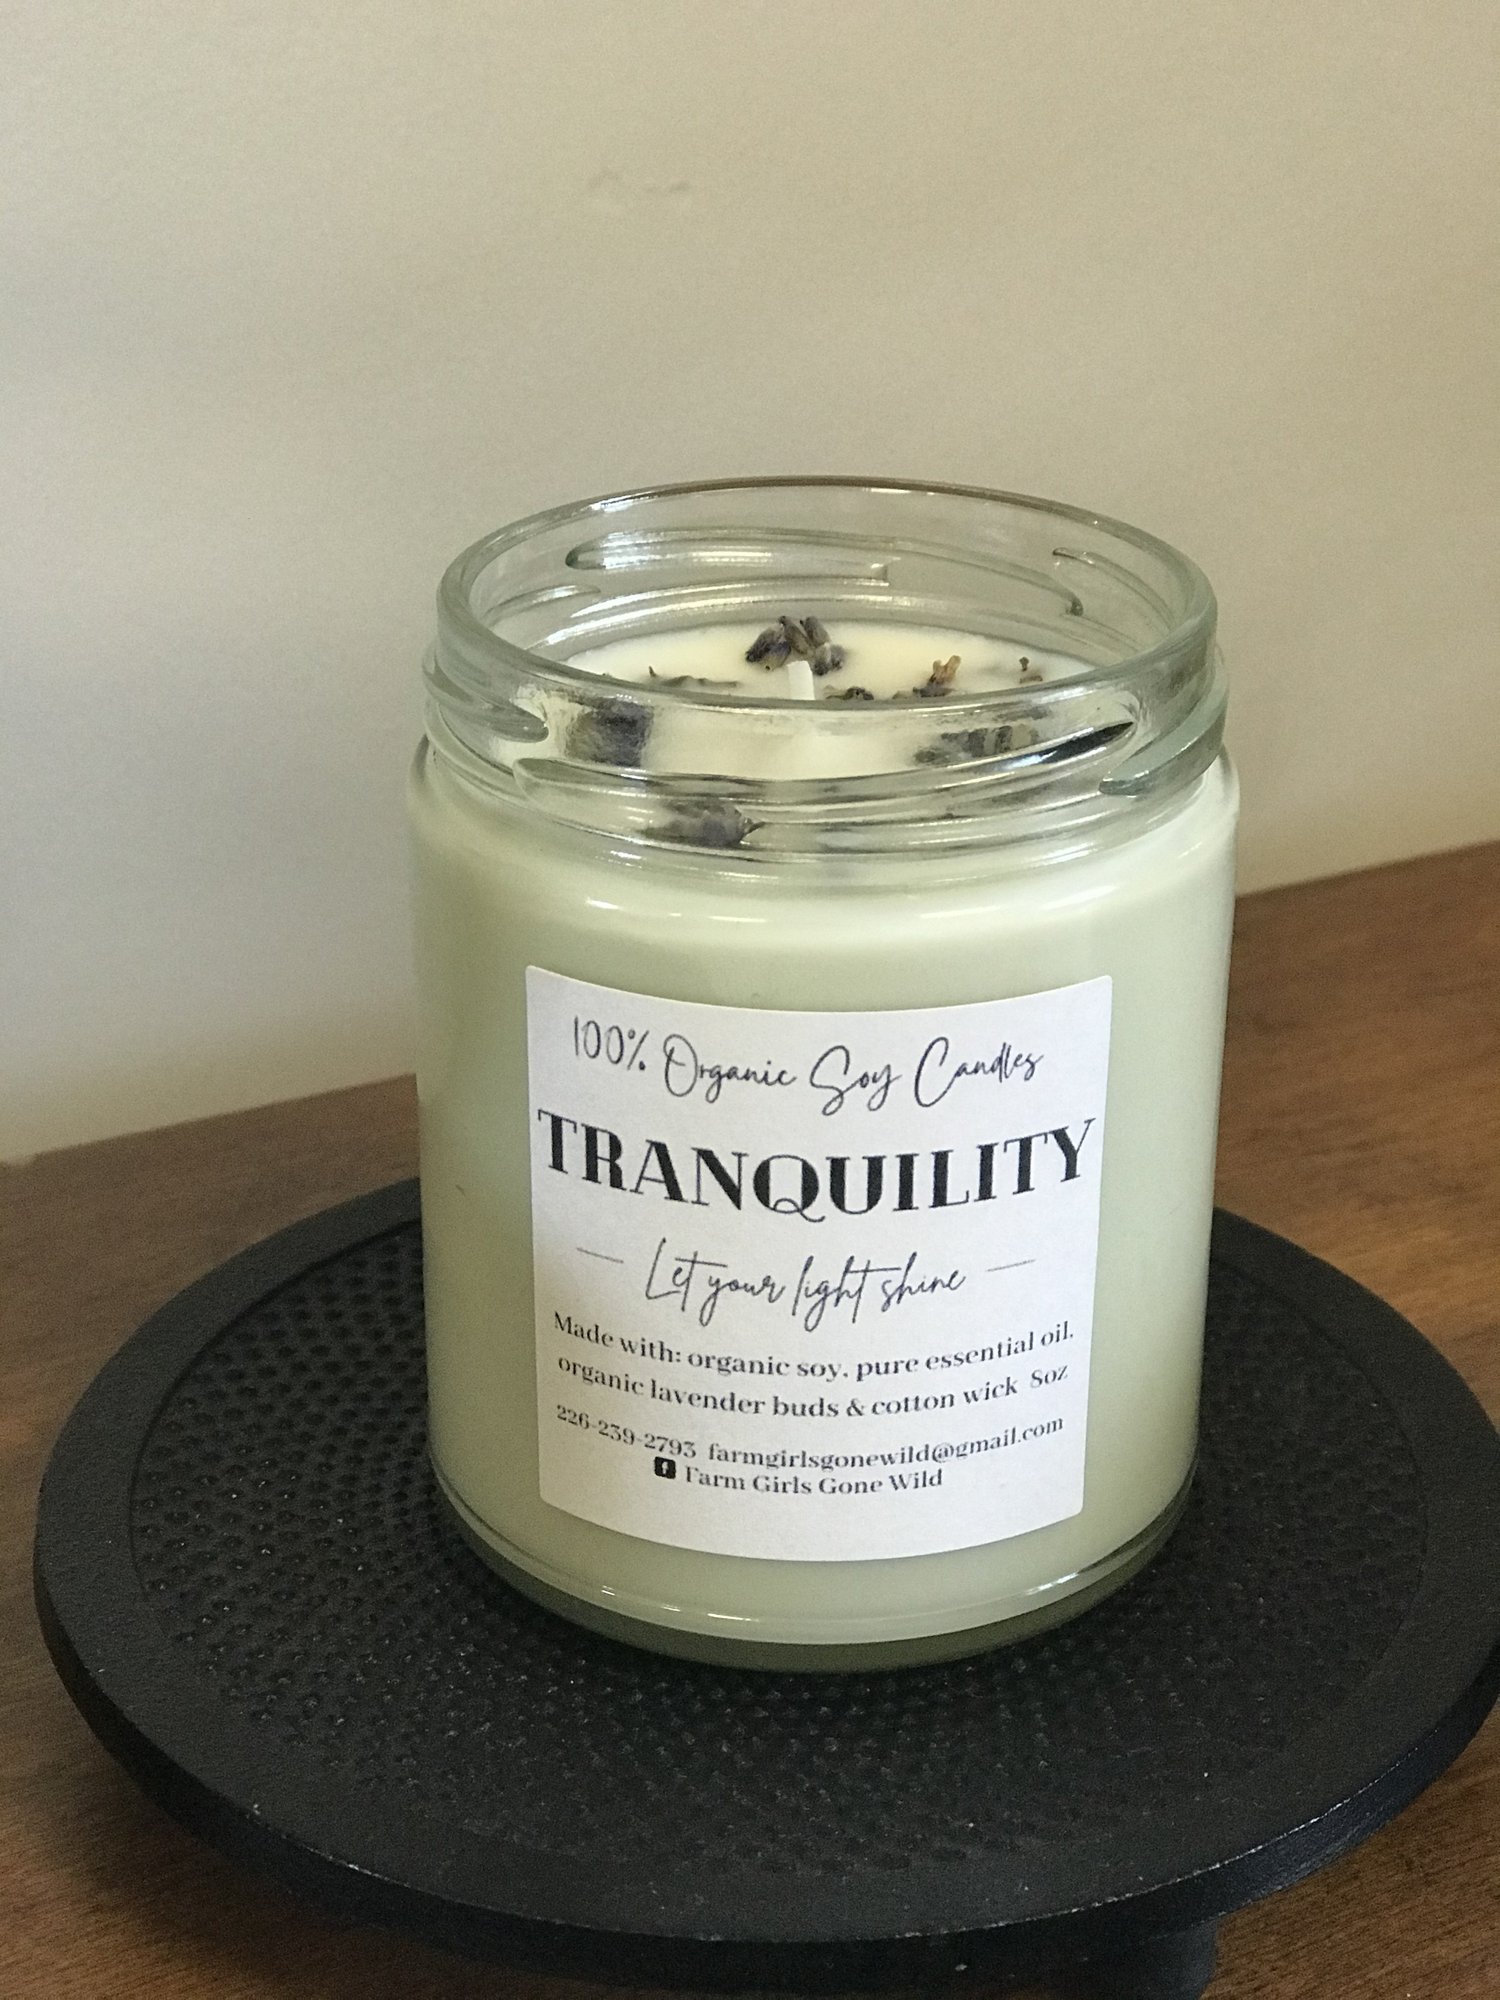 Tranquility Candles